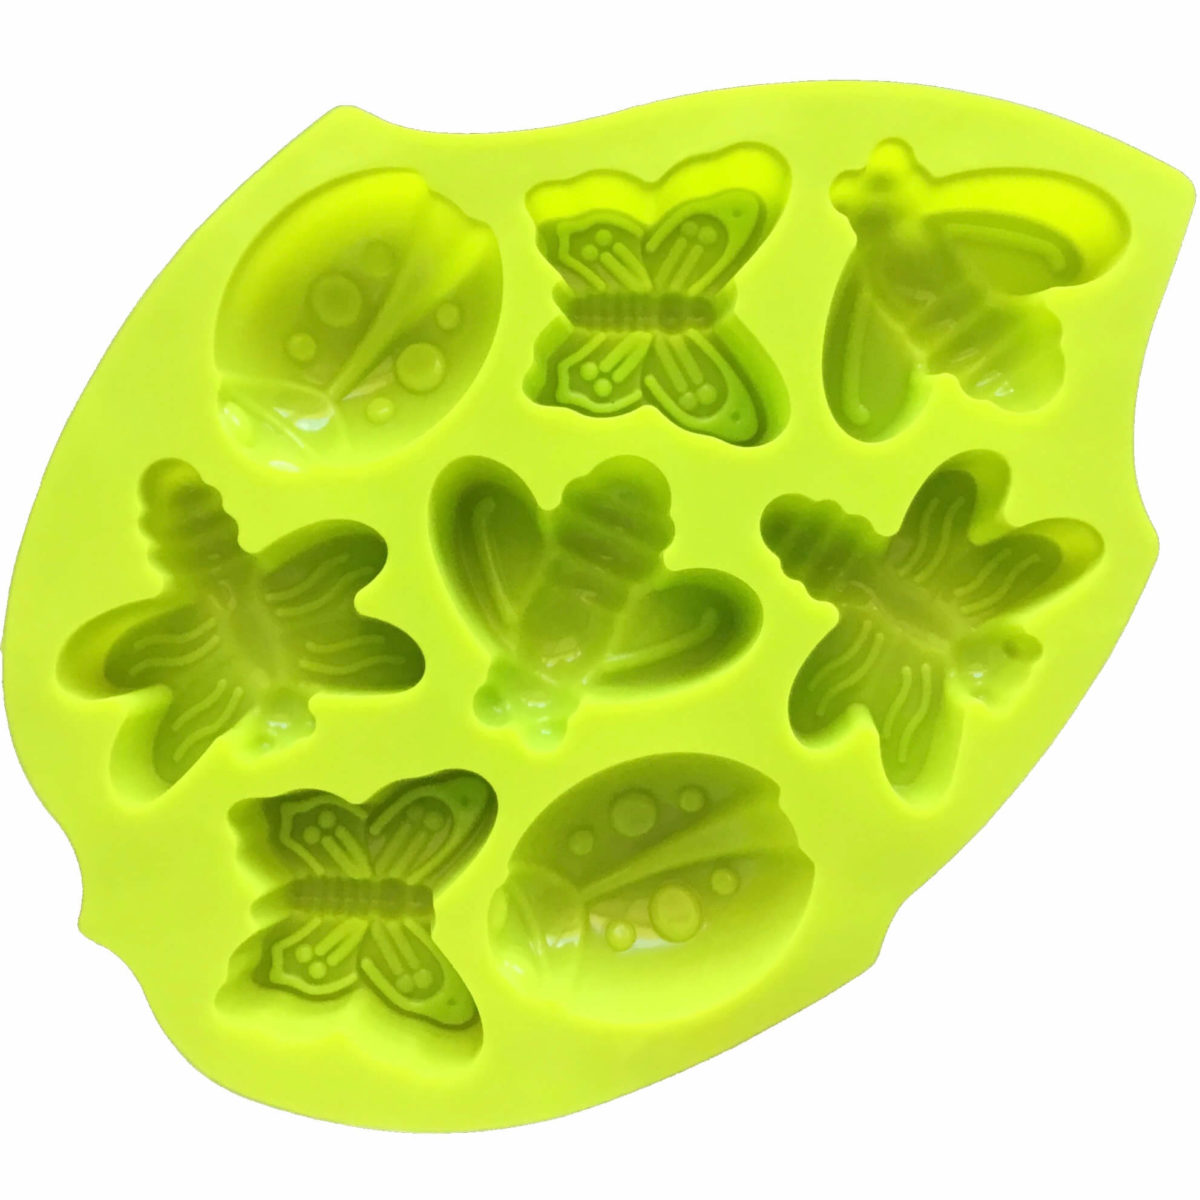 back of Green leaf-shaped silicone mould with eight cavities - two each of butterfly, bee, ladybug and dragonfly